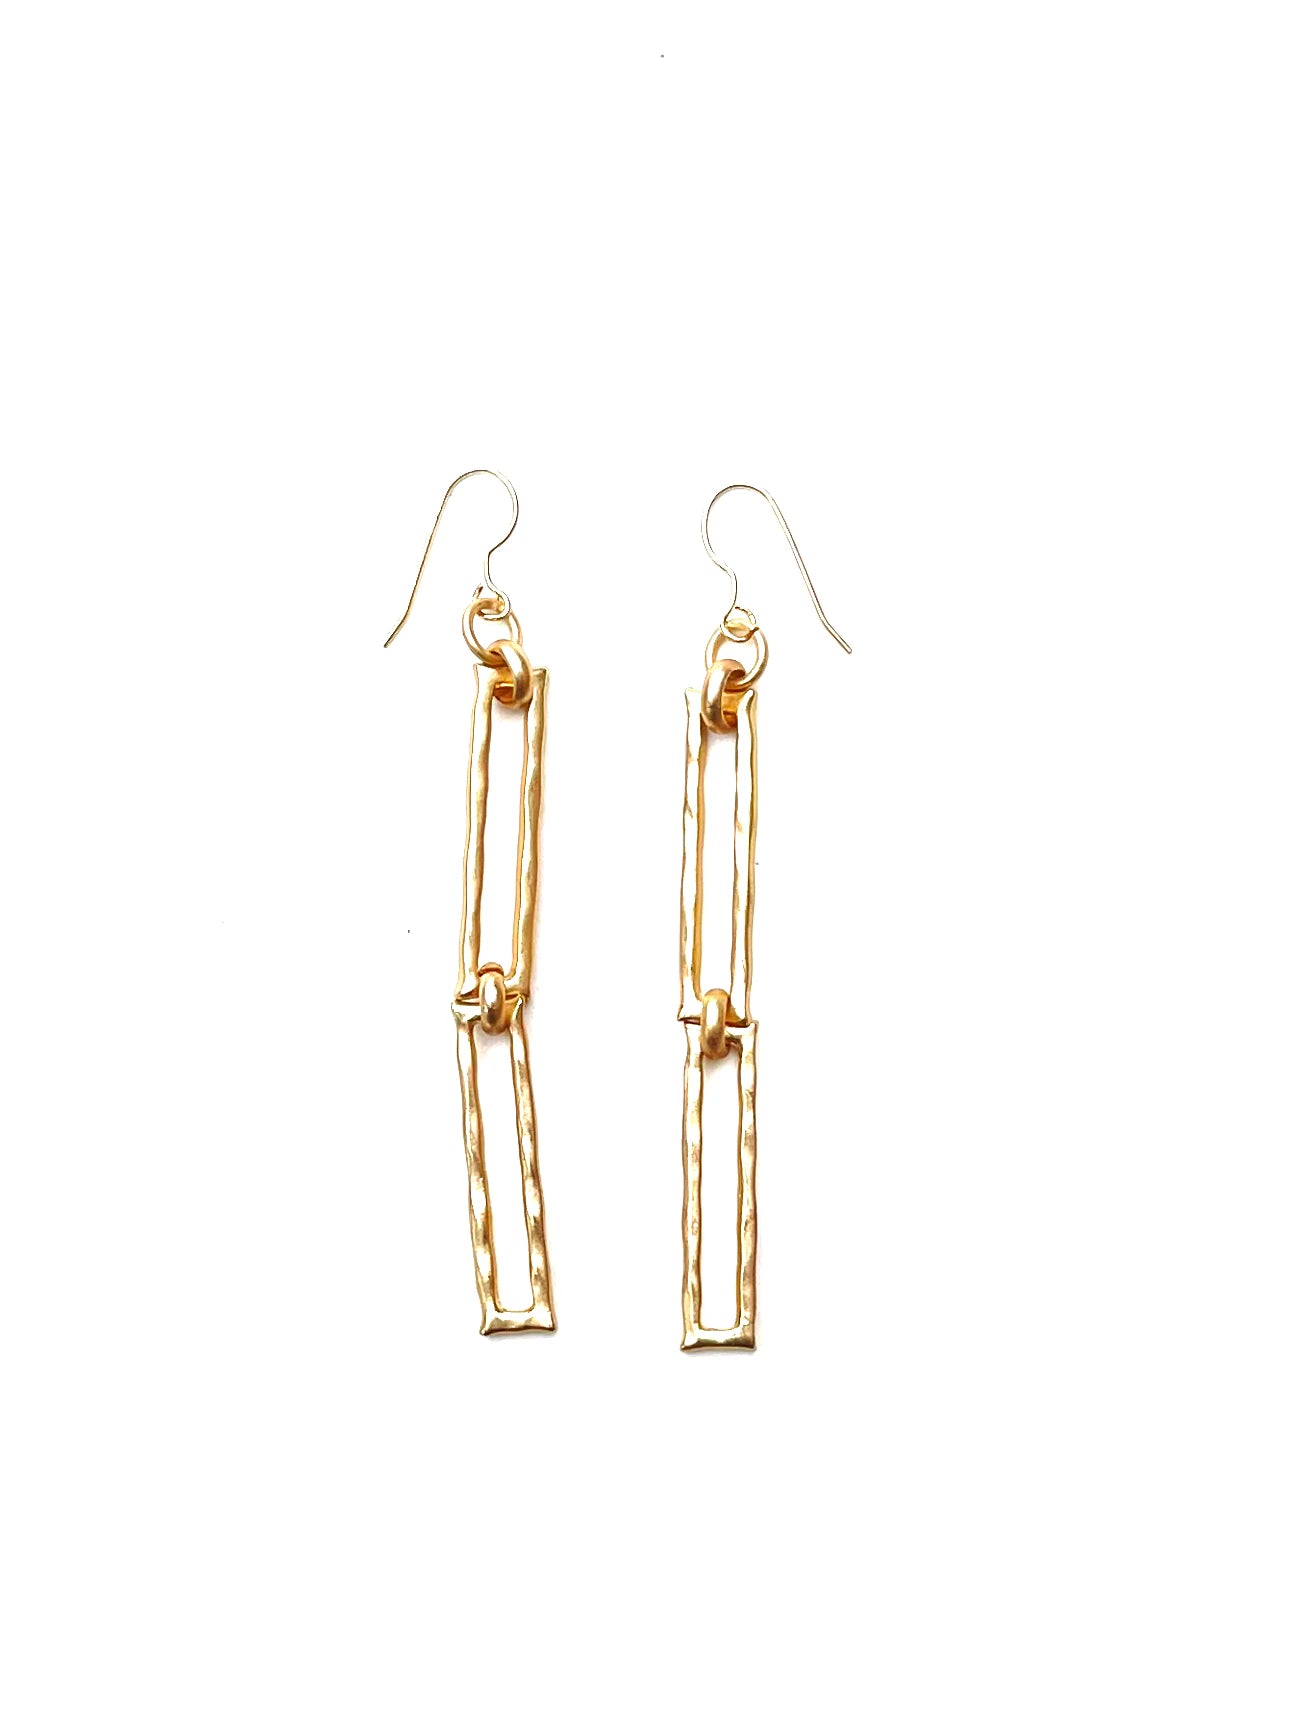 Fall-2 - earrings with double hammered paperclip links